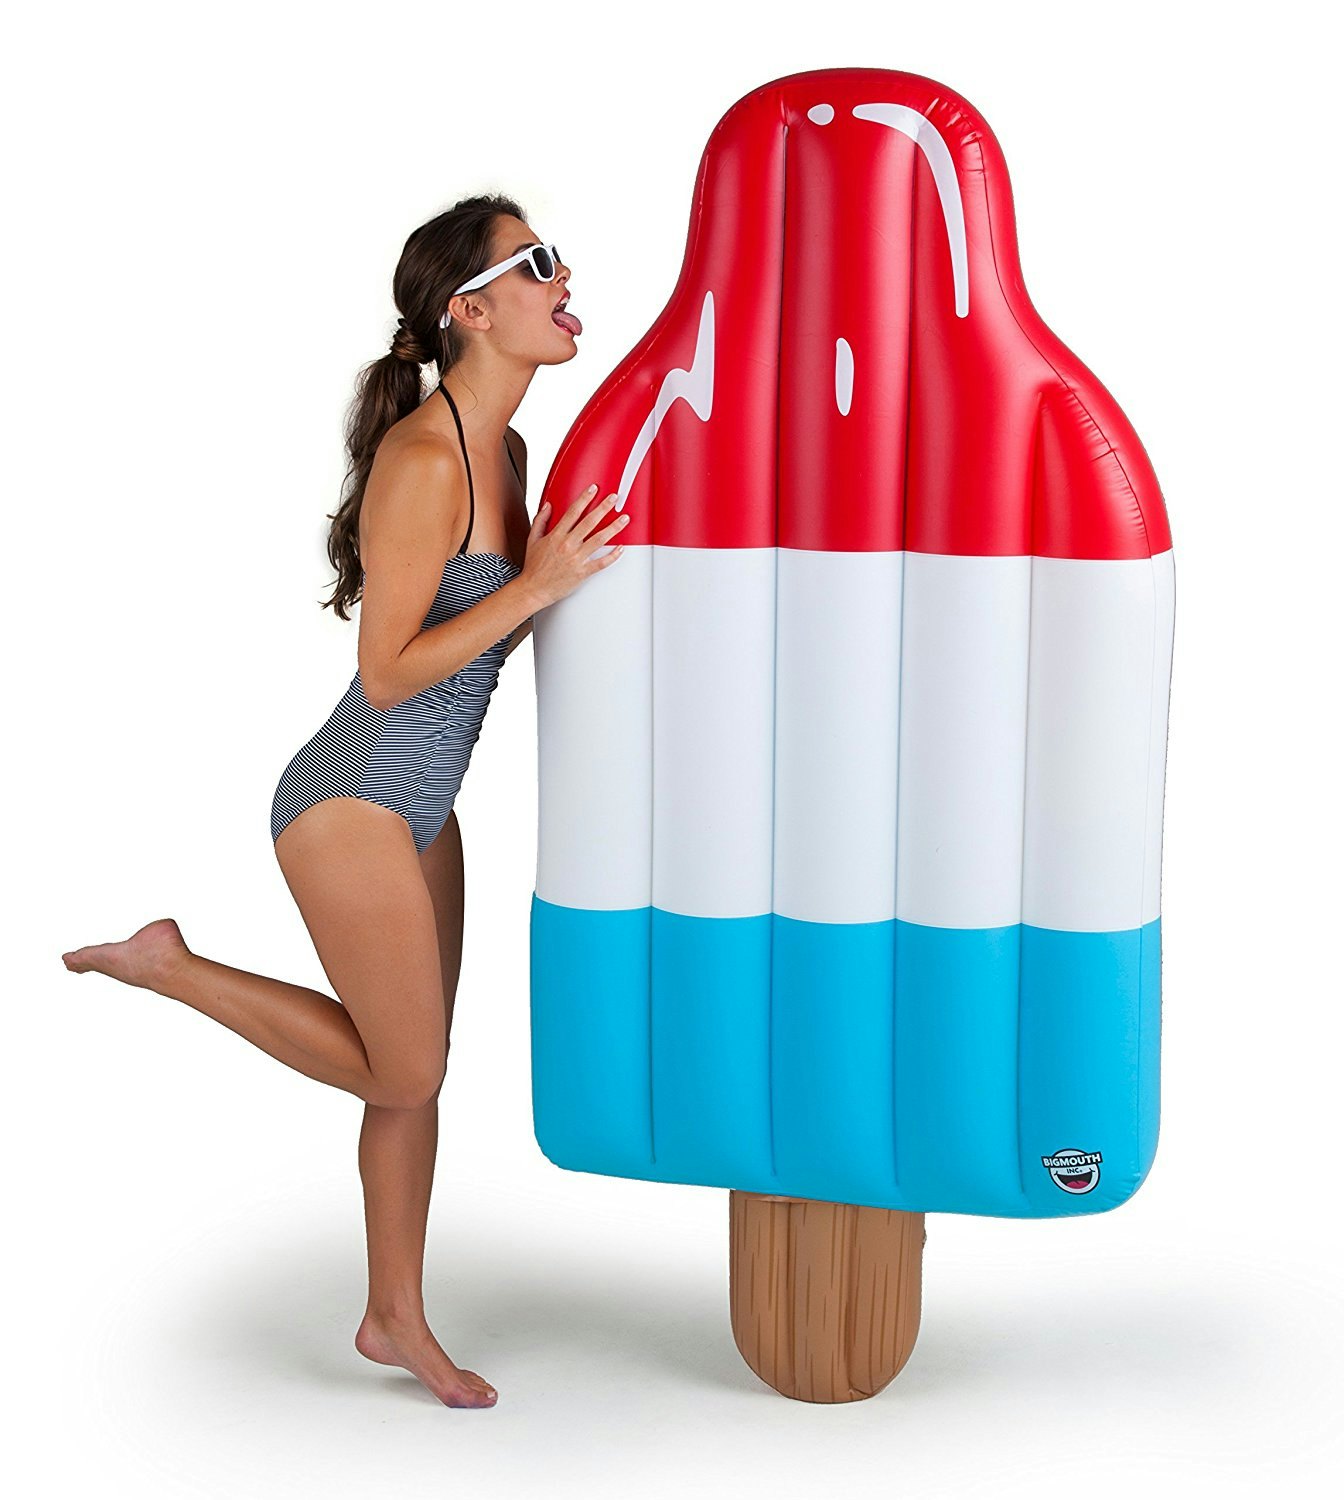 Red, White, & Blue Pool Floats Are Here To Ensure You're Making A Splash  This Summer